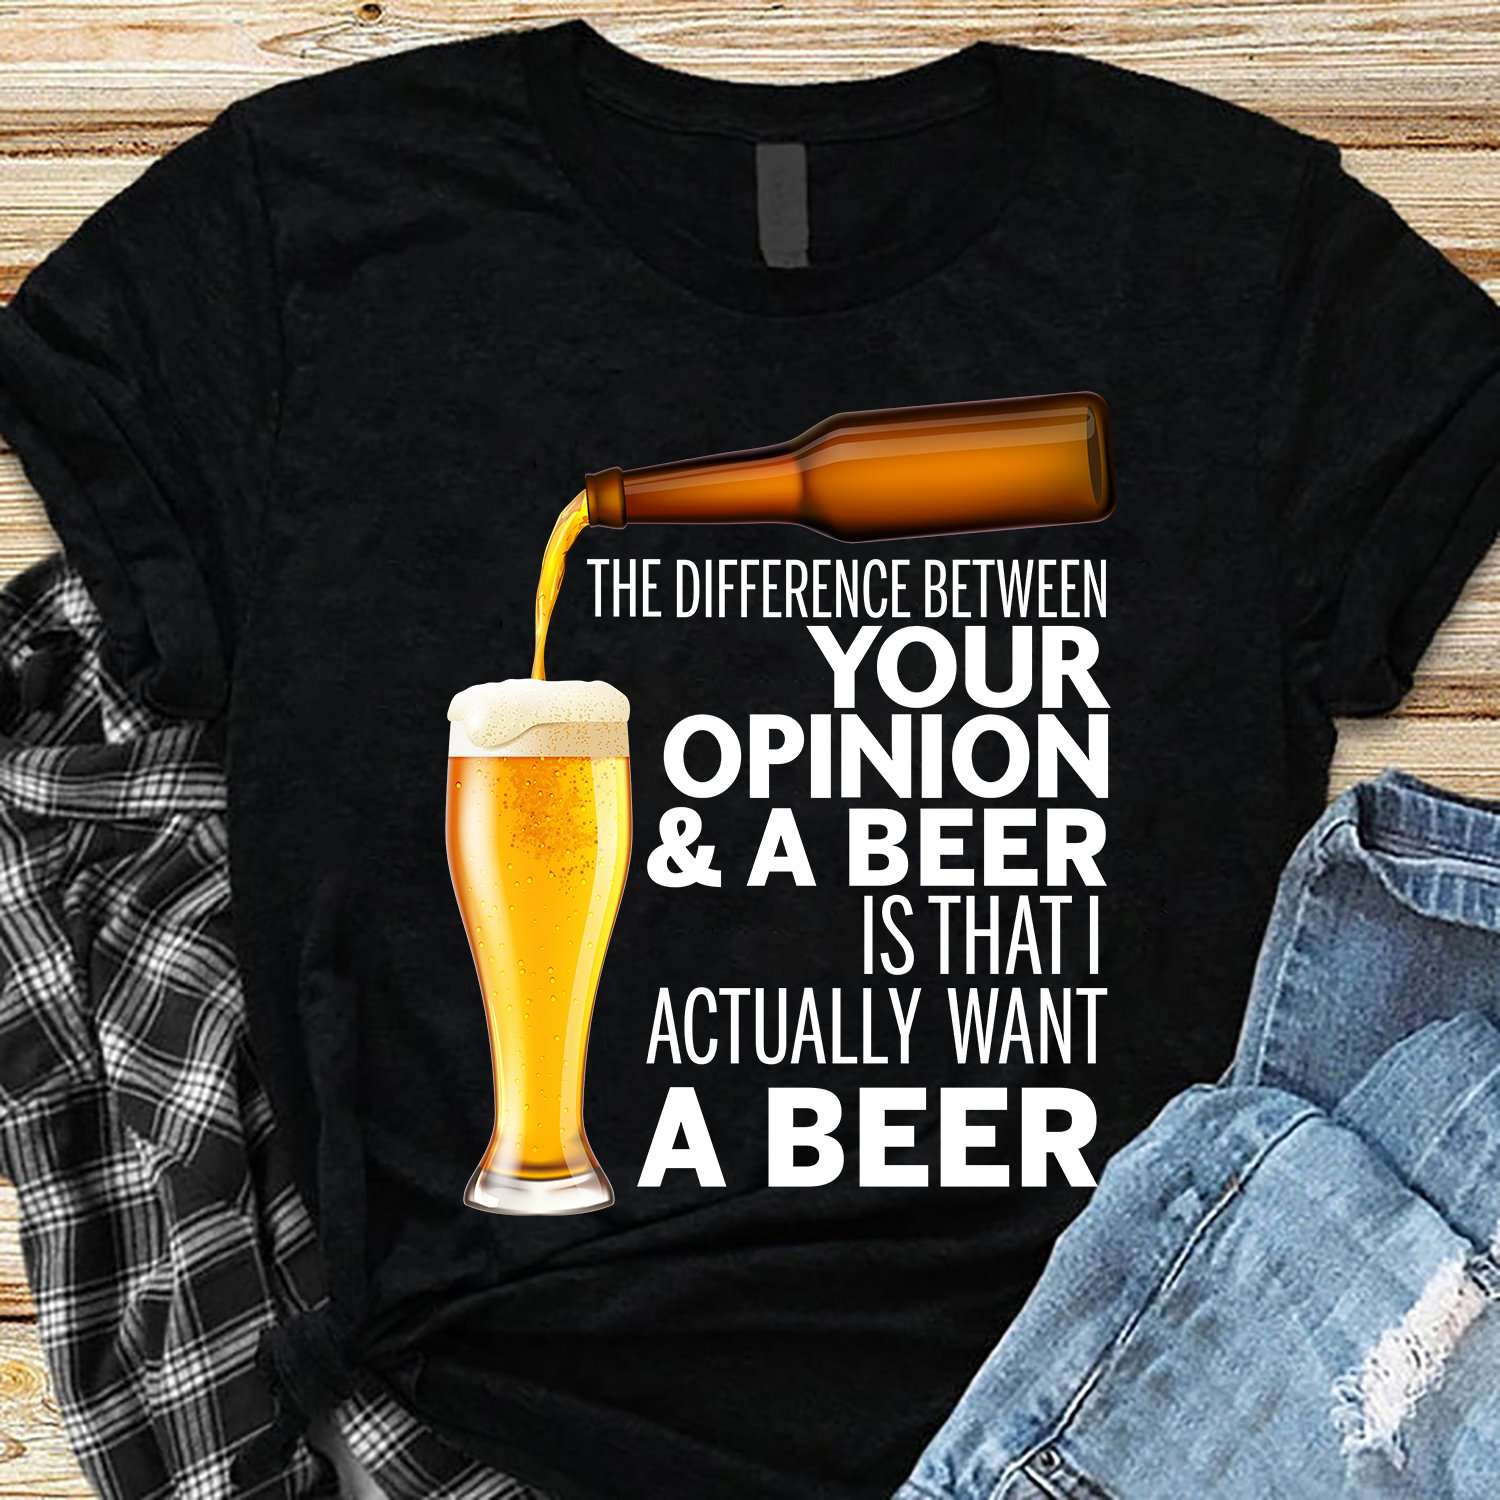 The difference between your opinion and a beer is that I actually want a beer - Beer lover